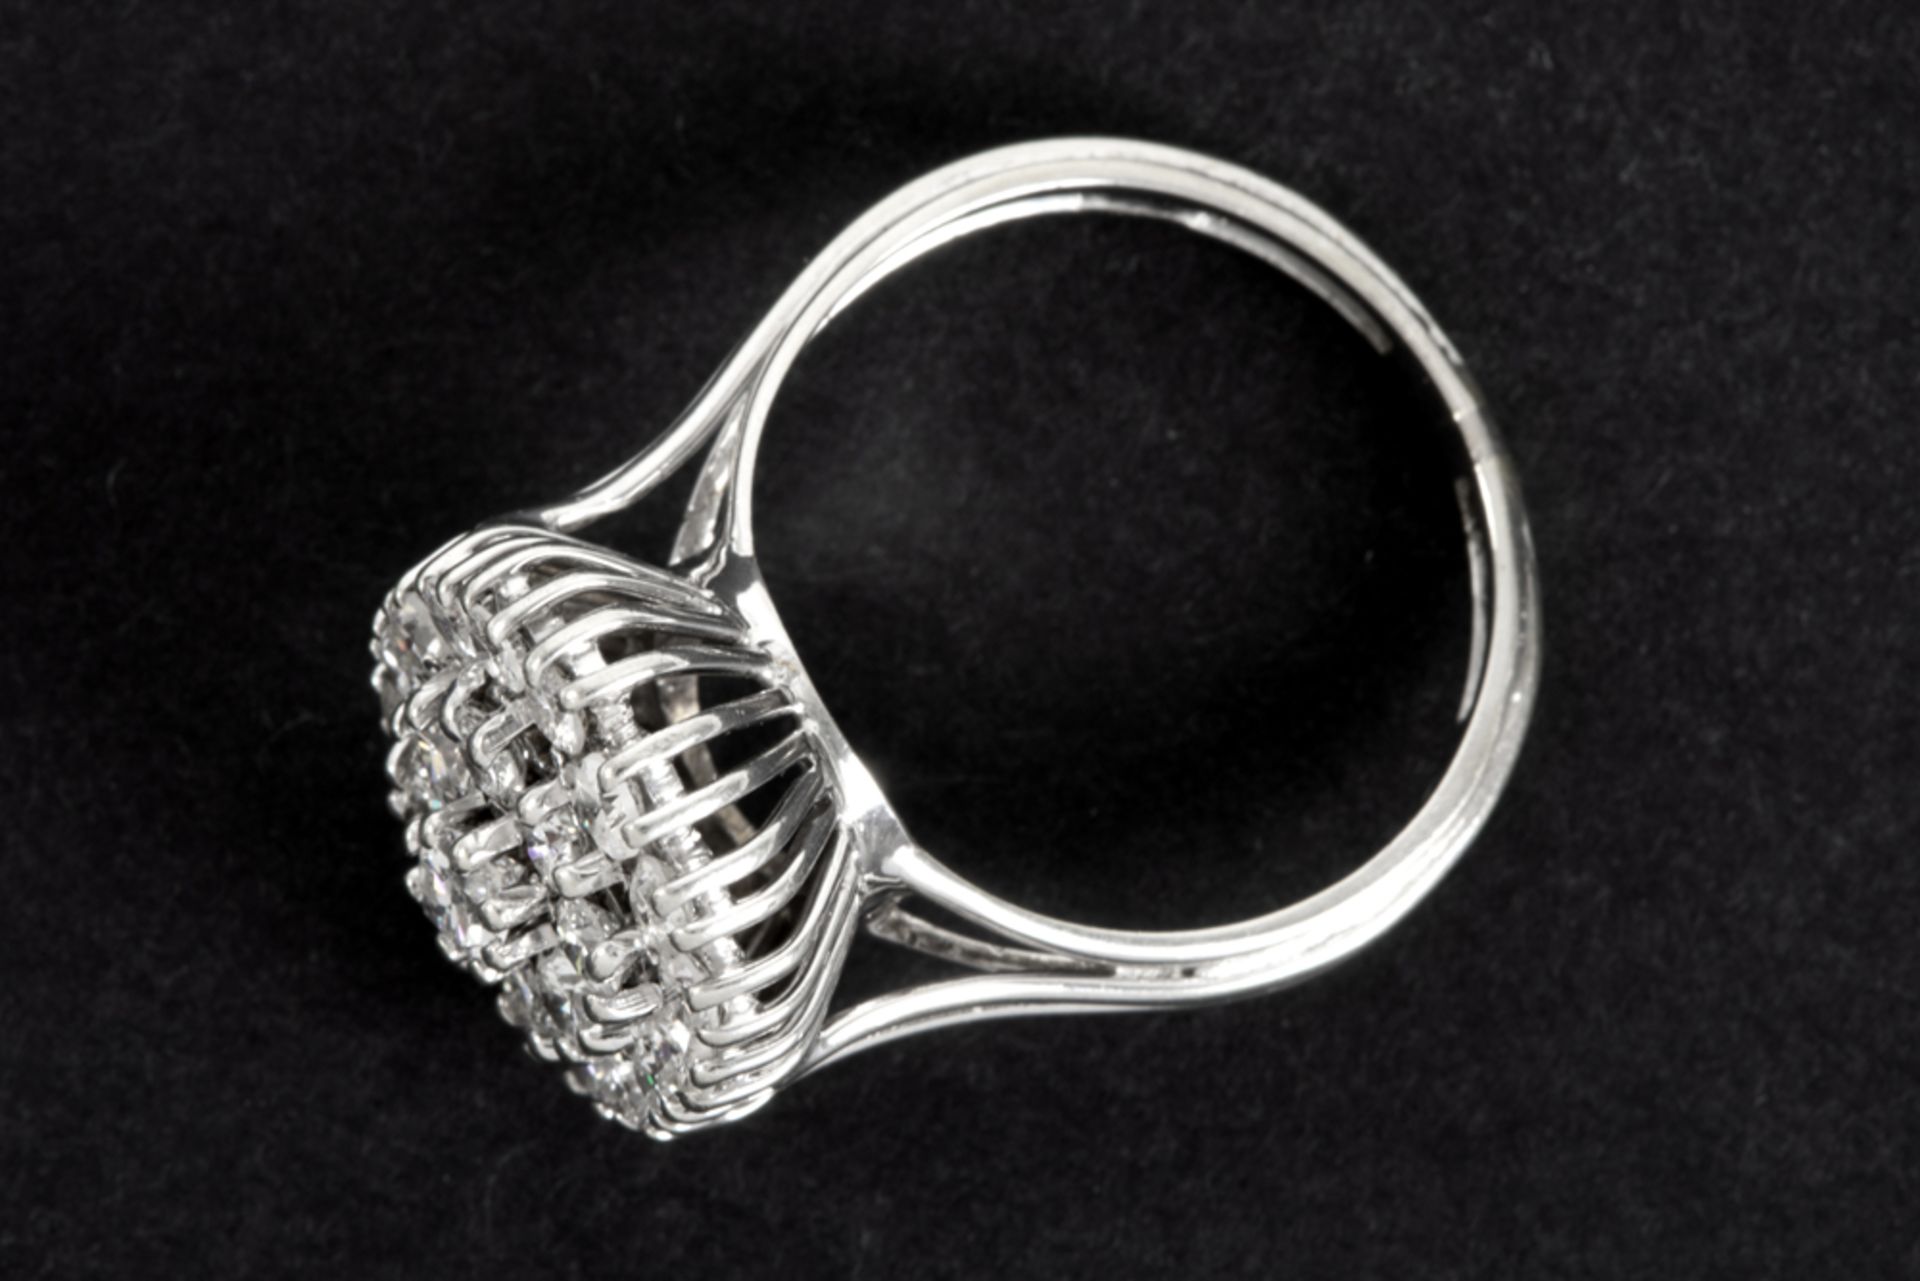 ring in white gold (18 carat) with ca 1,50 carat of high quality marquis' cut (the central one) - Image 2 of 2